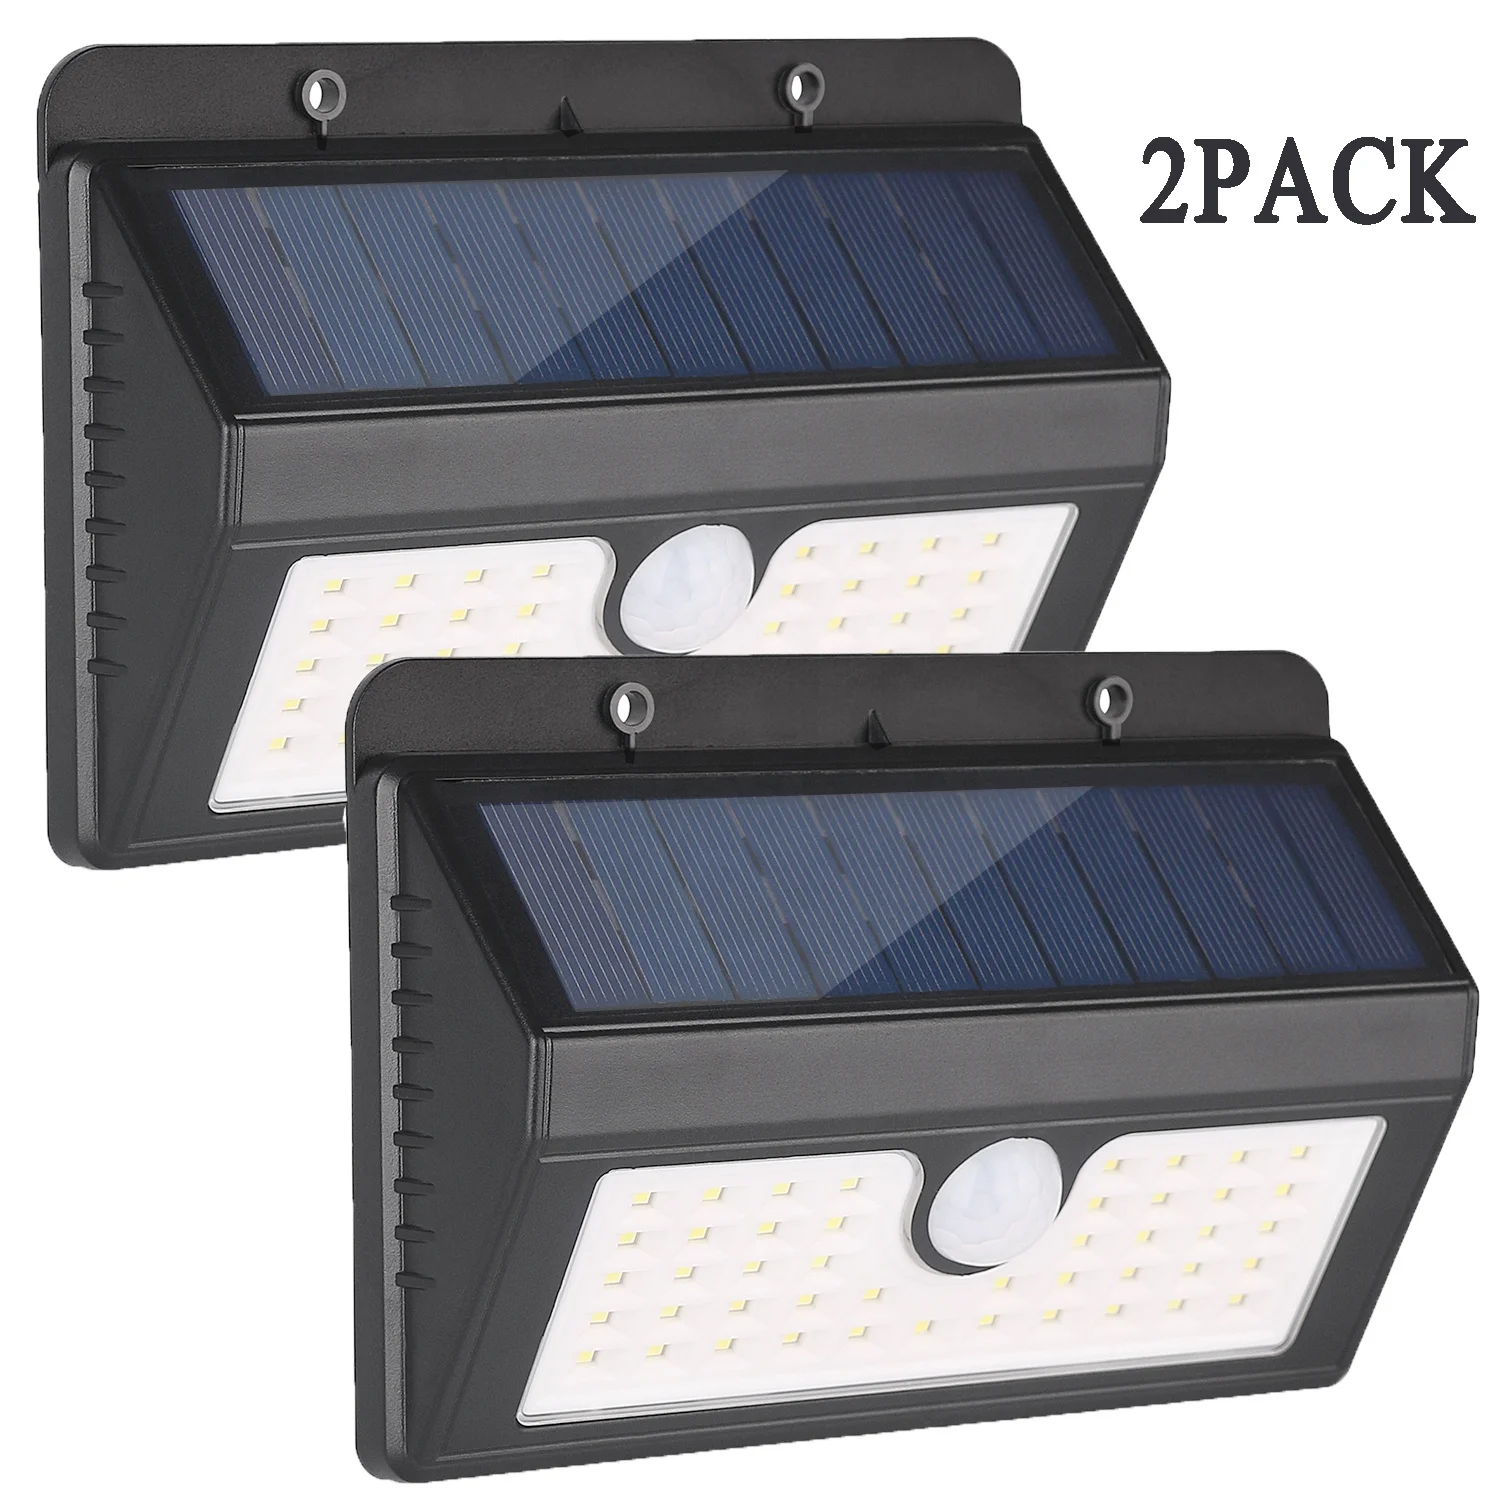 45LEDs Solar Power Kits Light Waterproof Lamp Outdoor Garden Path Security Motion Sensor Wall Wireless Home,Porch,Stairs Light